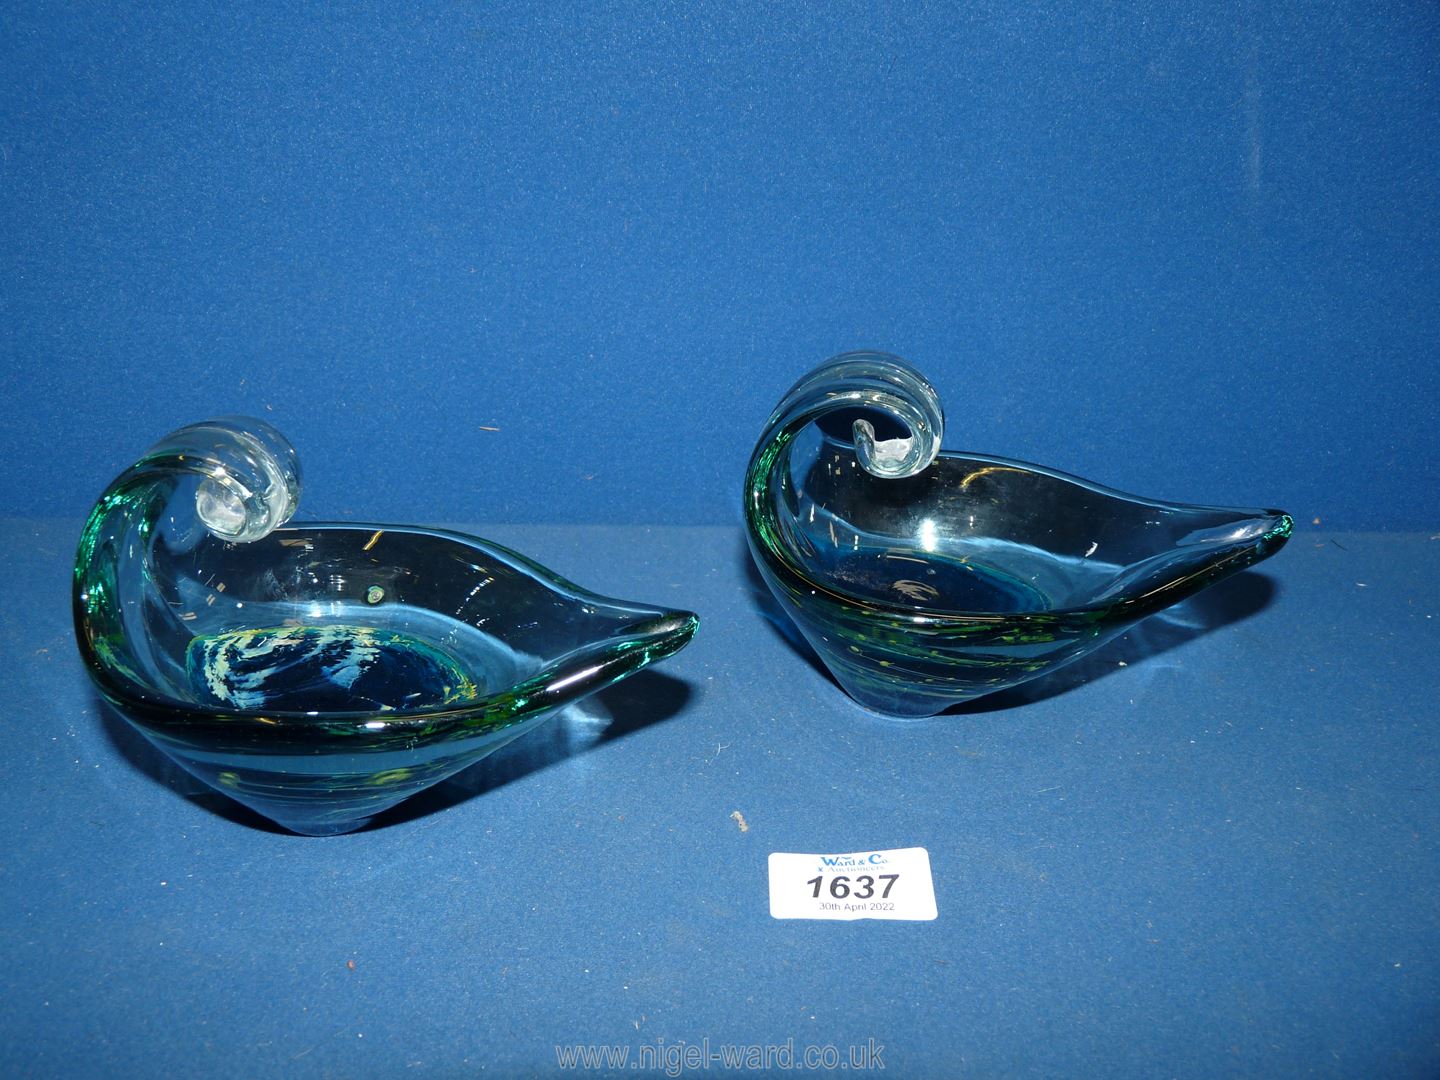 A pair of Mdina boat shape bowls with curved handles in shades of blue each 5 1/2" long.